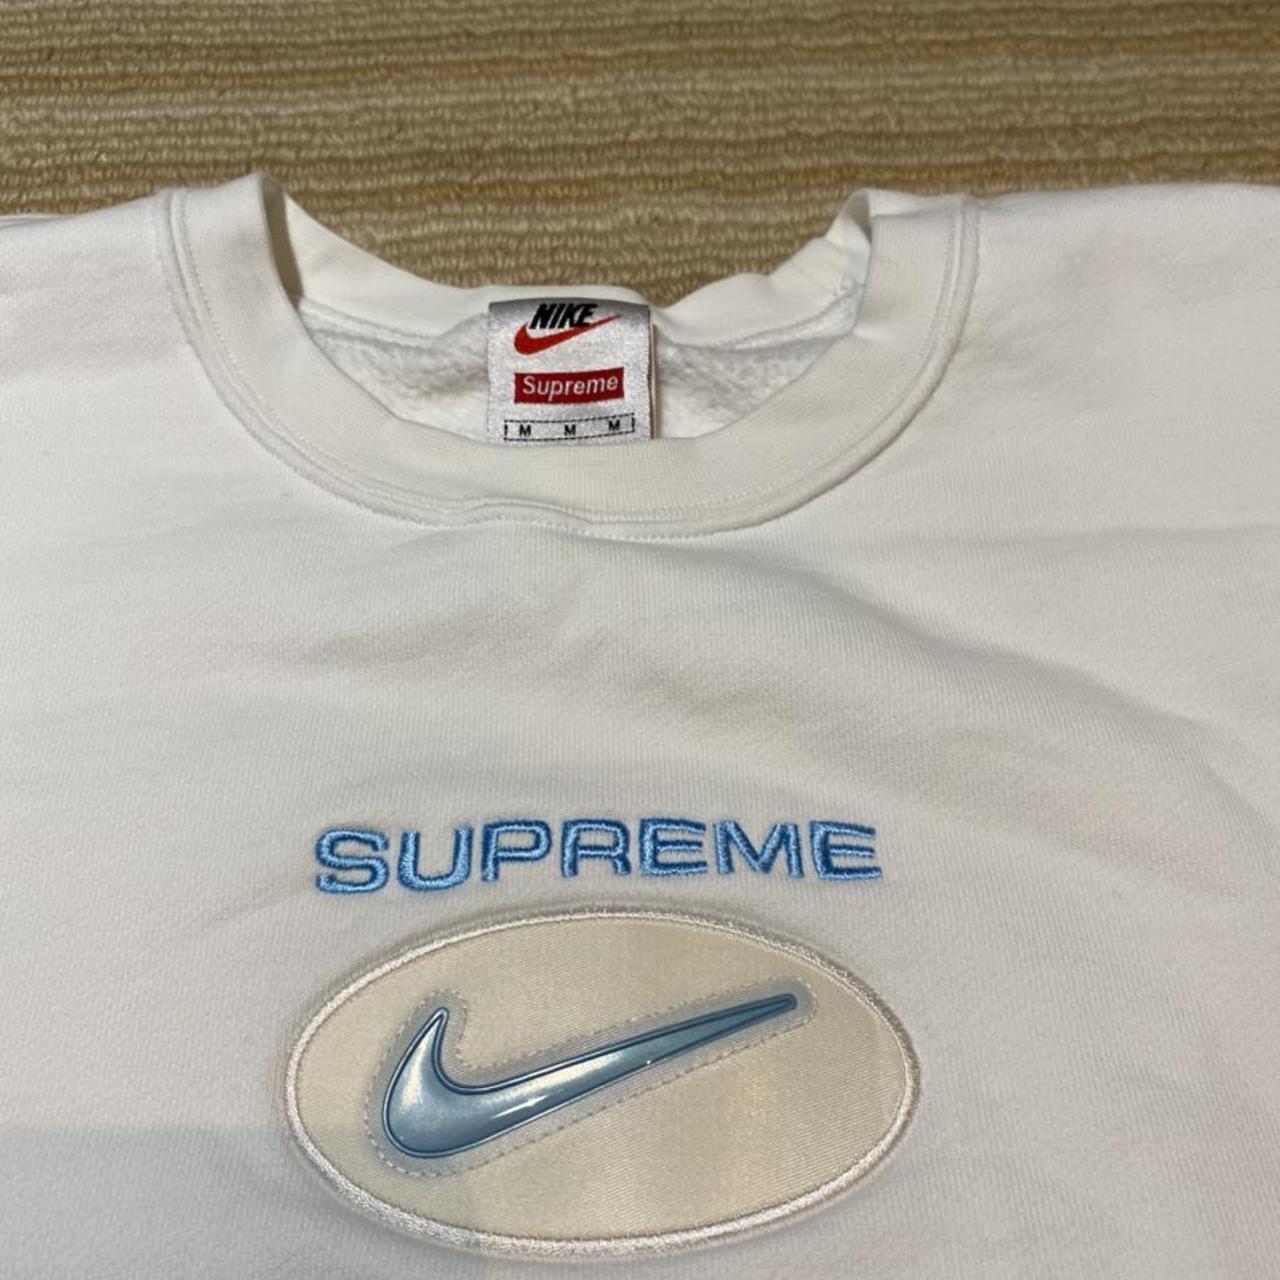 Supreme Nike Jewel Crewneck, Small stain showed in...